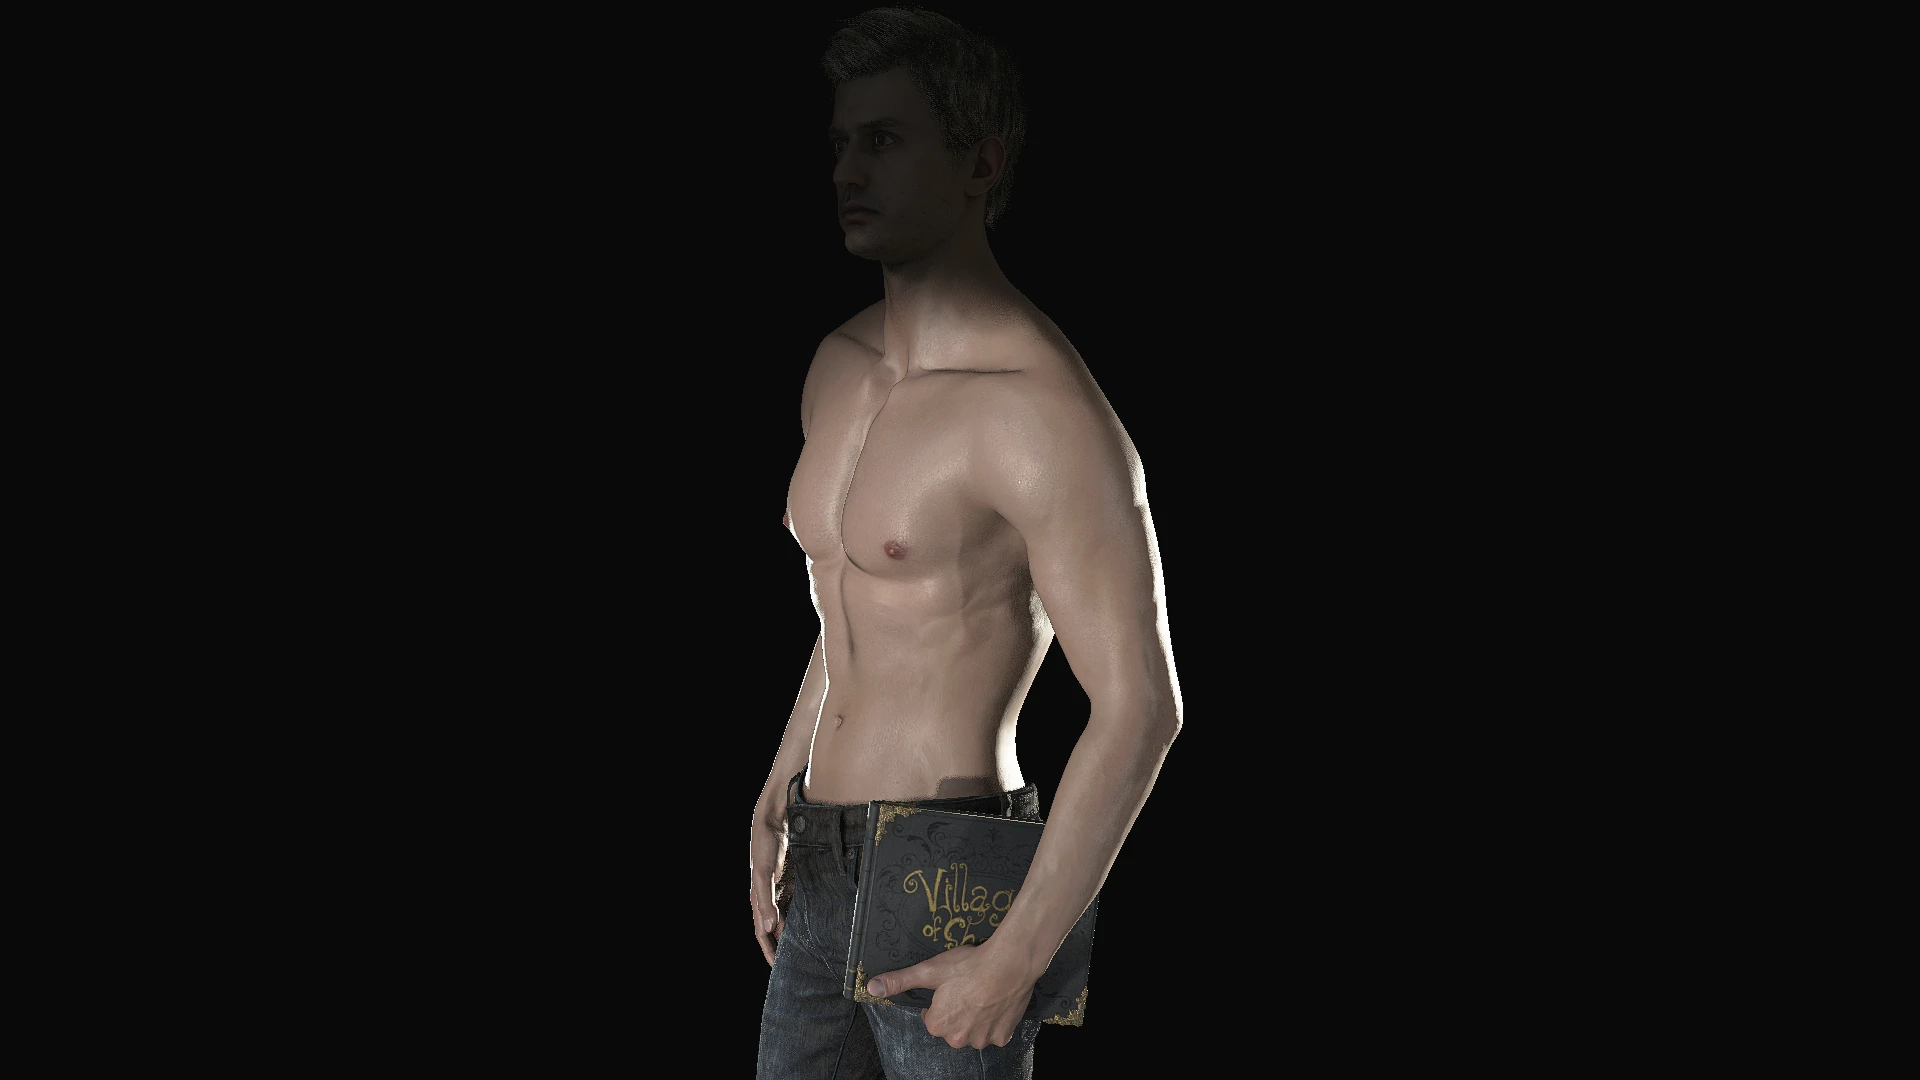 Shirtless Ethan Winters Include 3rd Person Addon.